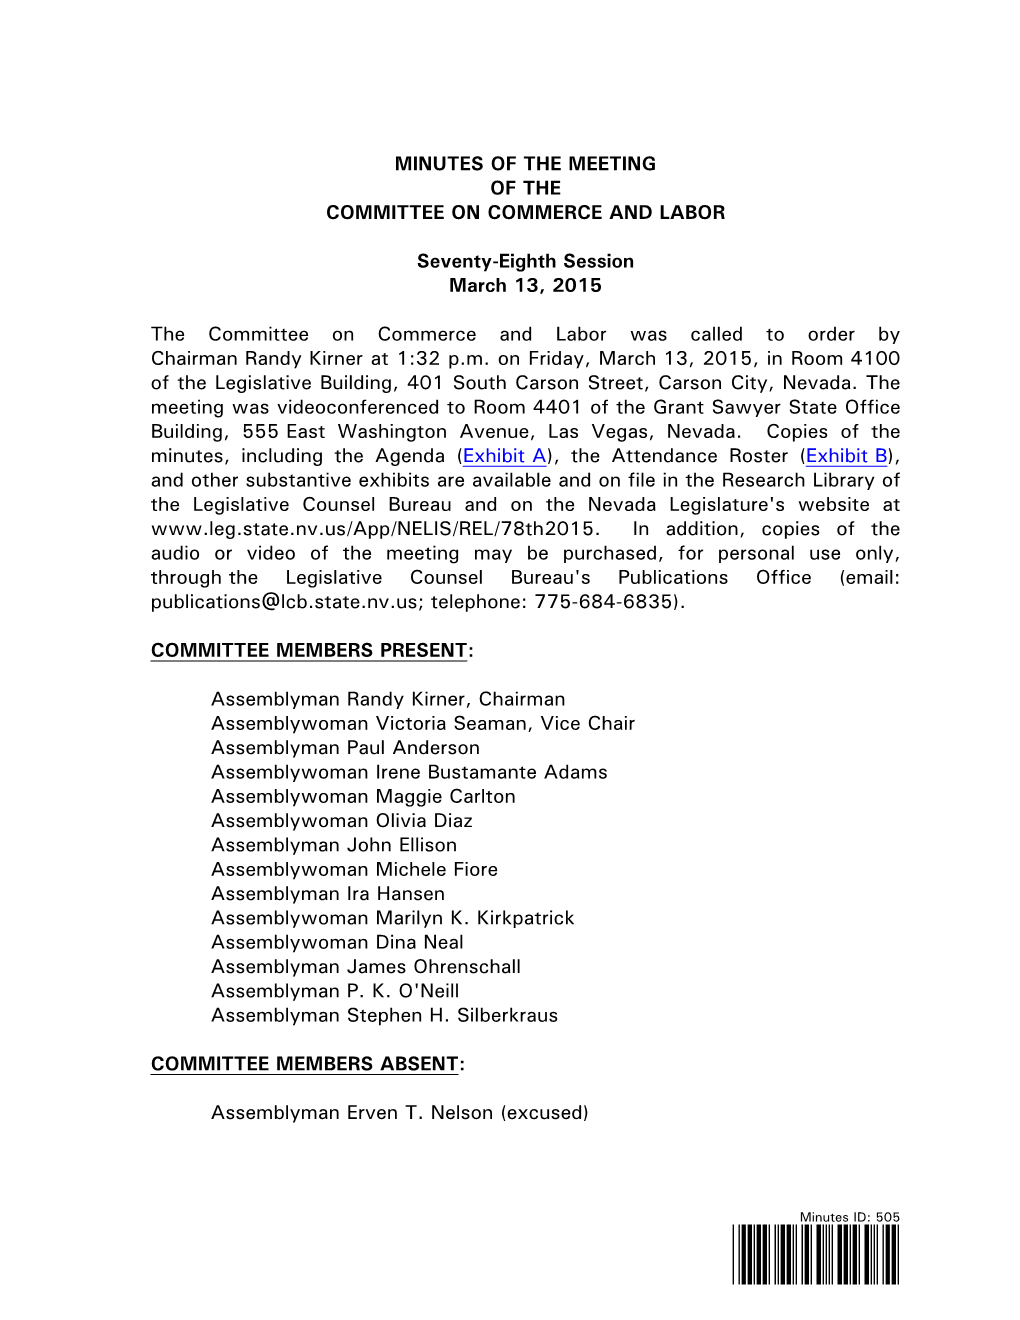 Committee on Commerce and Labor-March 13, 2015